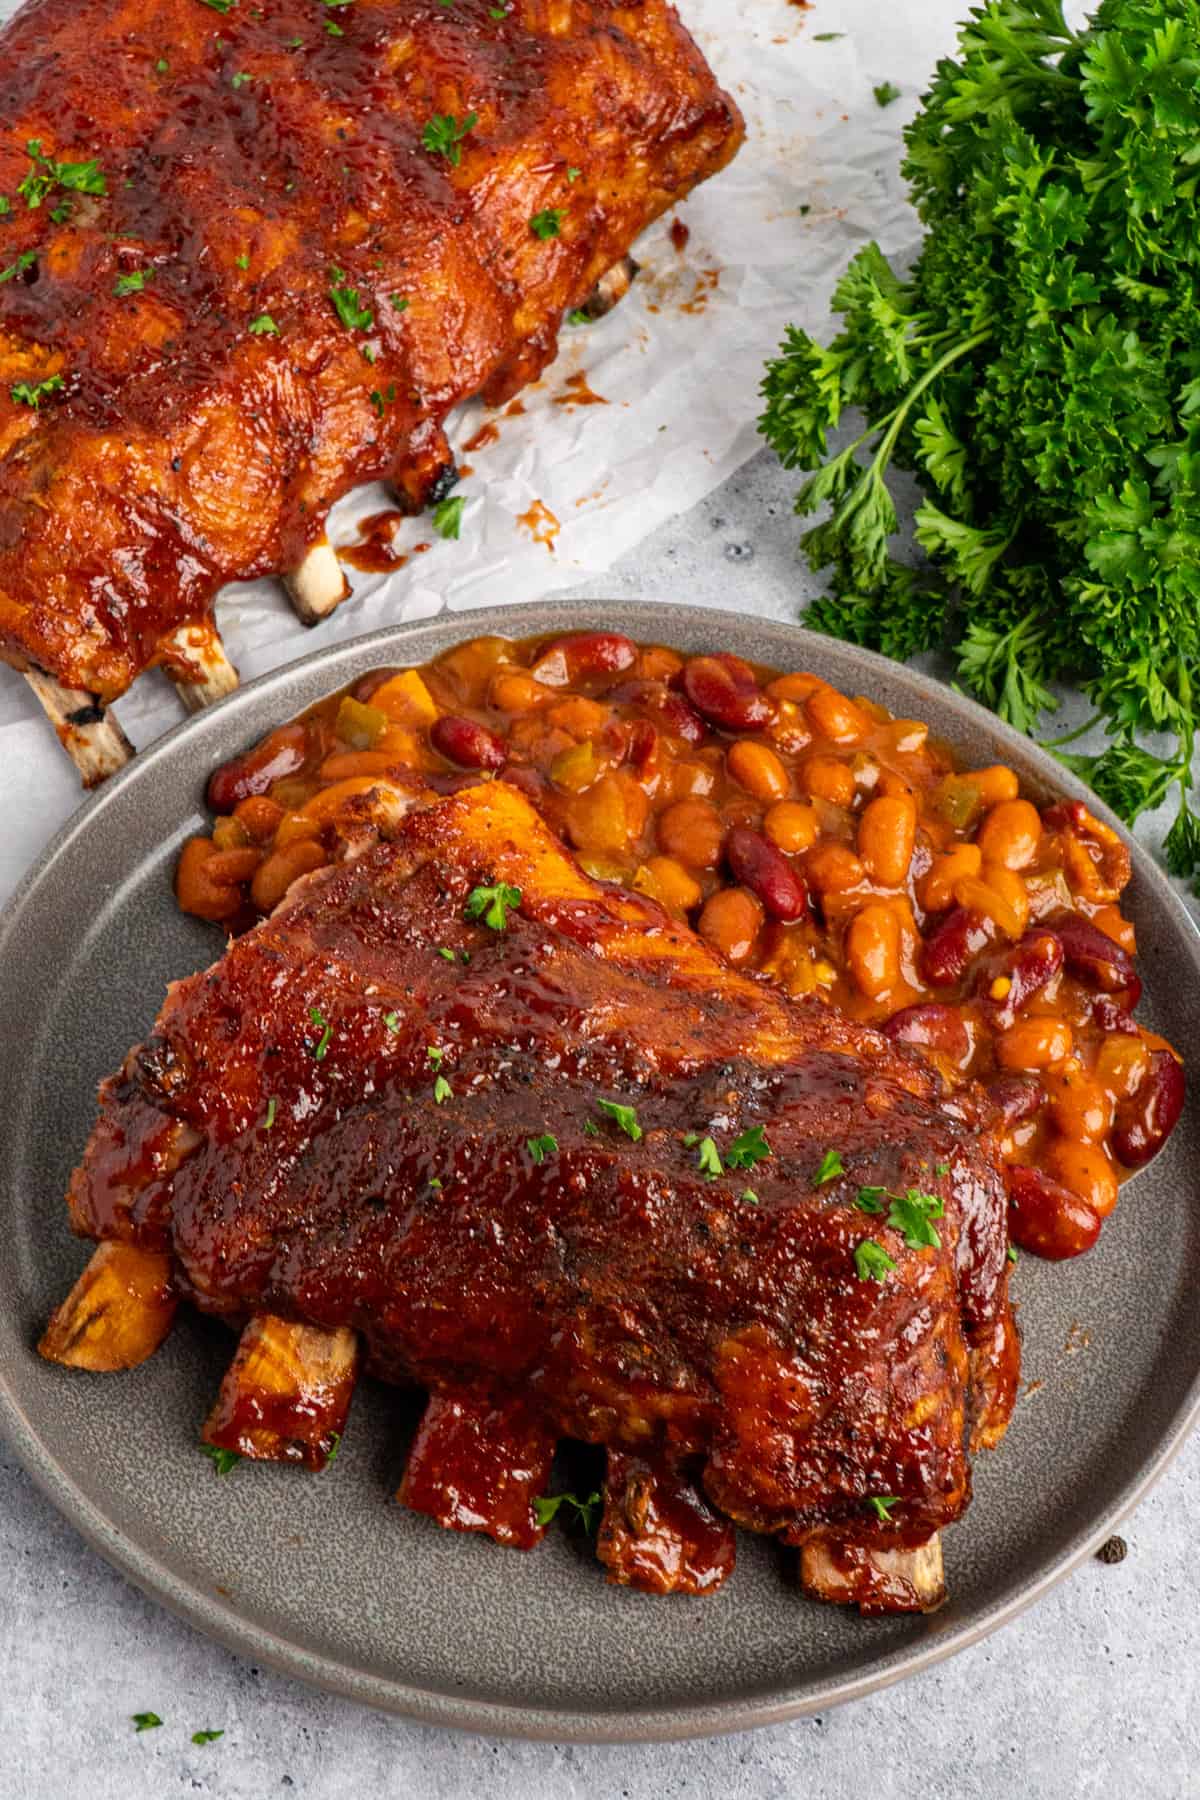 Country style ribs on a grey plate with baked beans